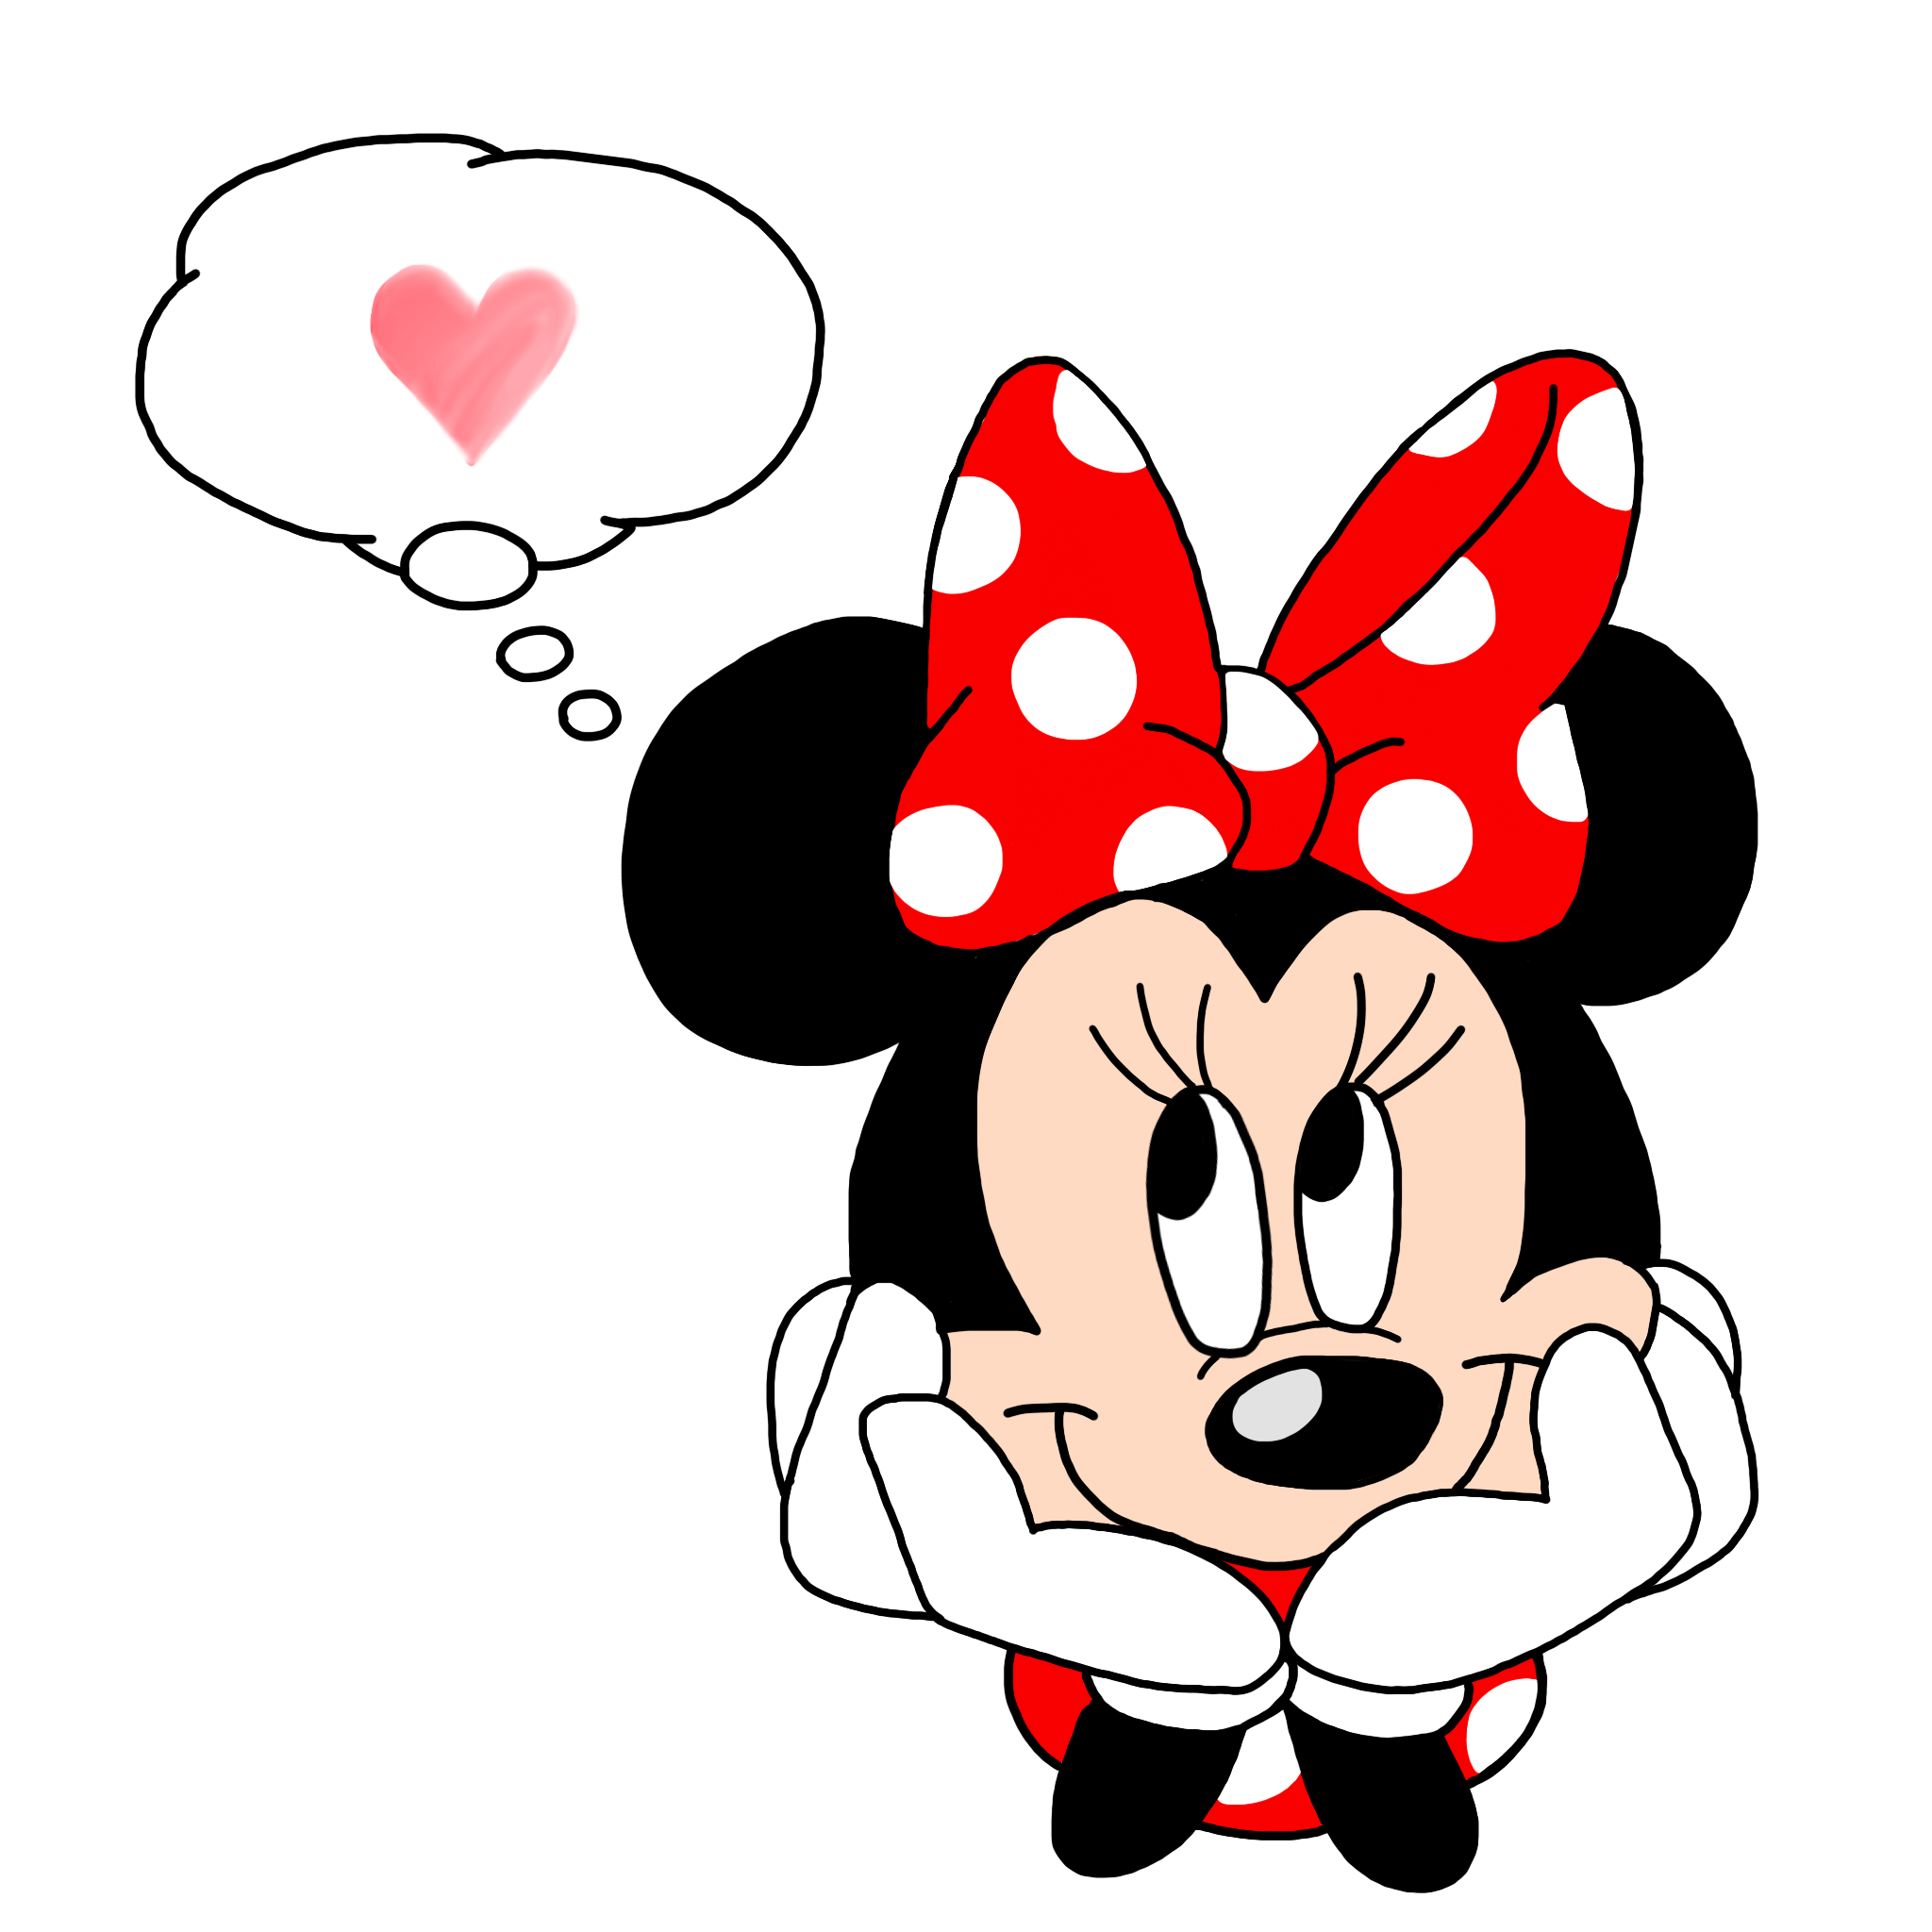 Baby Minnie Mouse Clip Art Png | Clipart library - Free Clipart Images